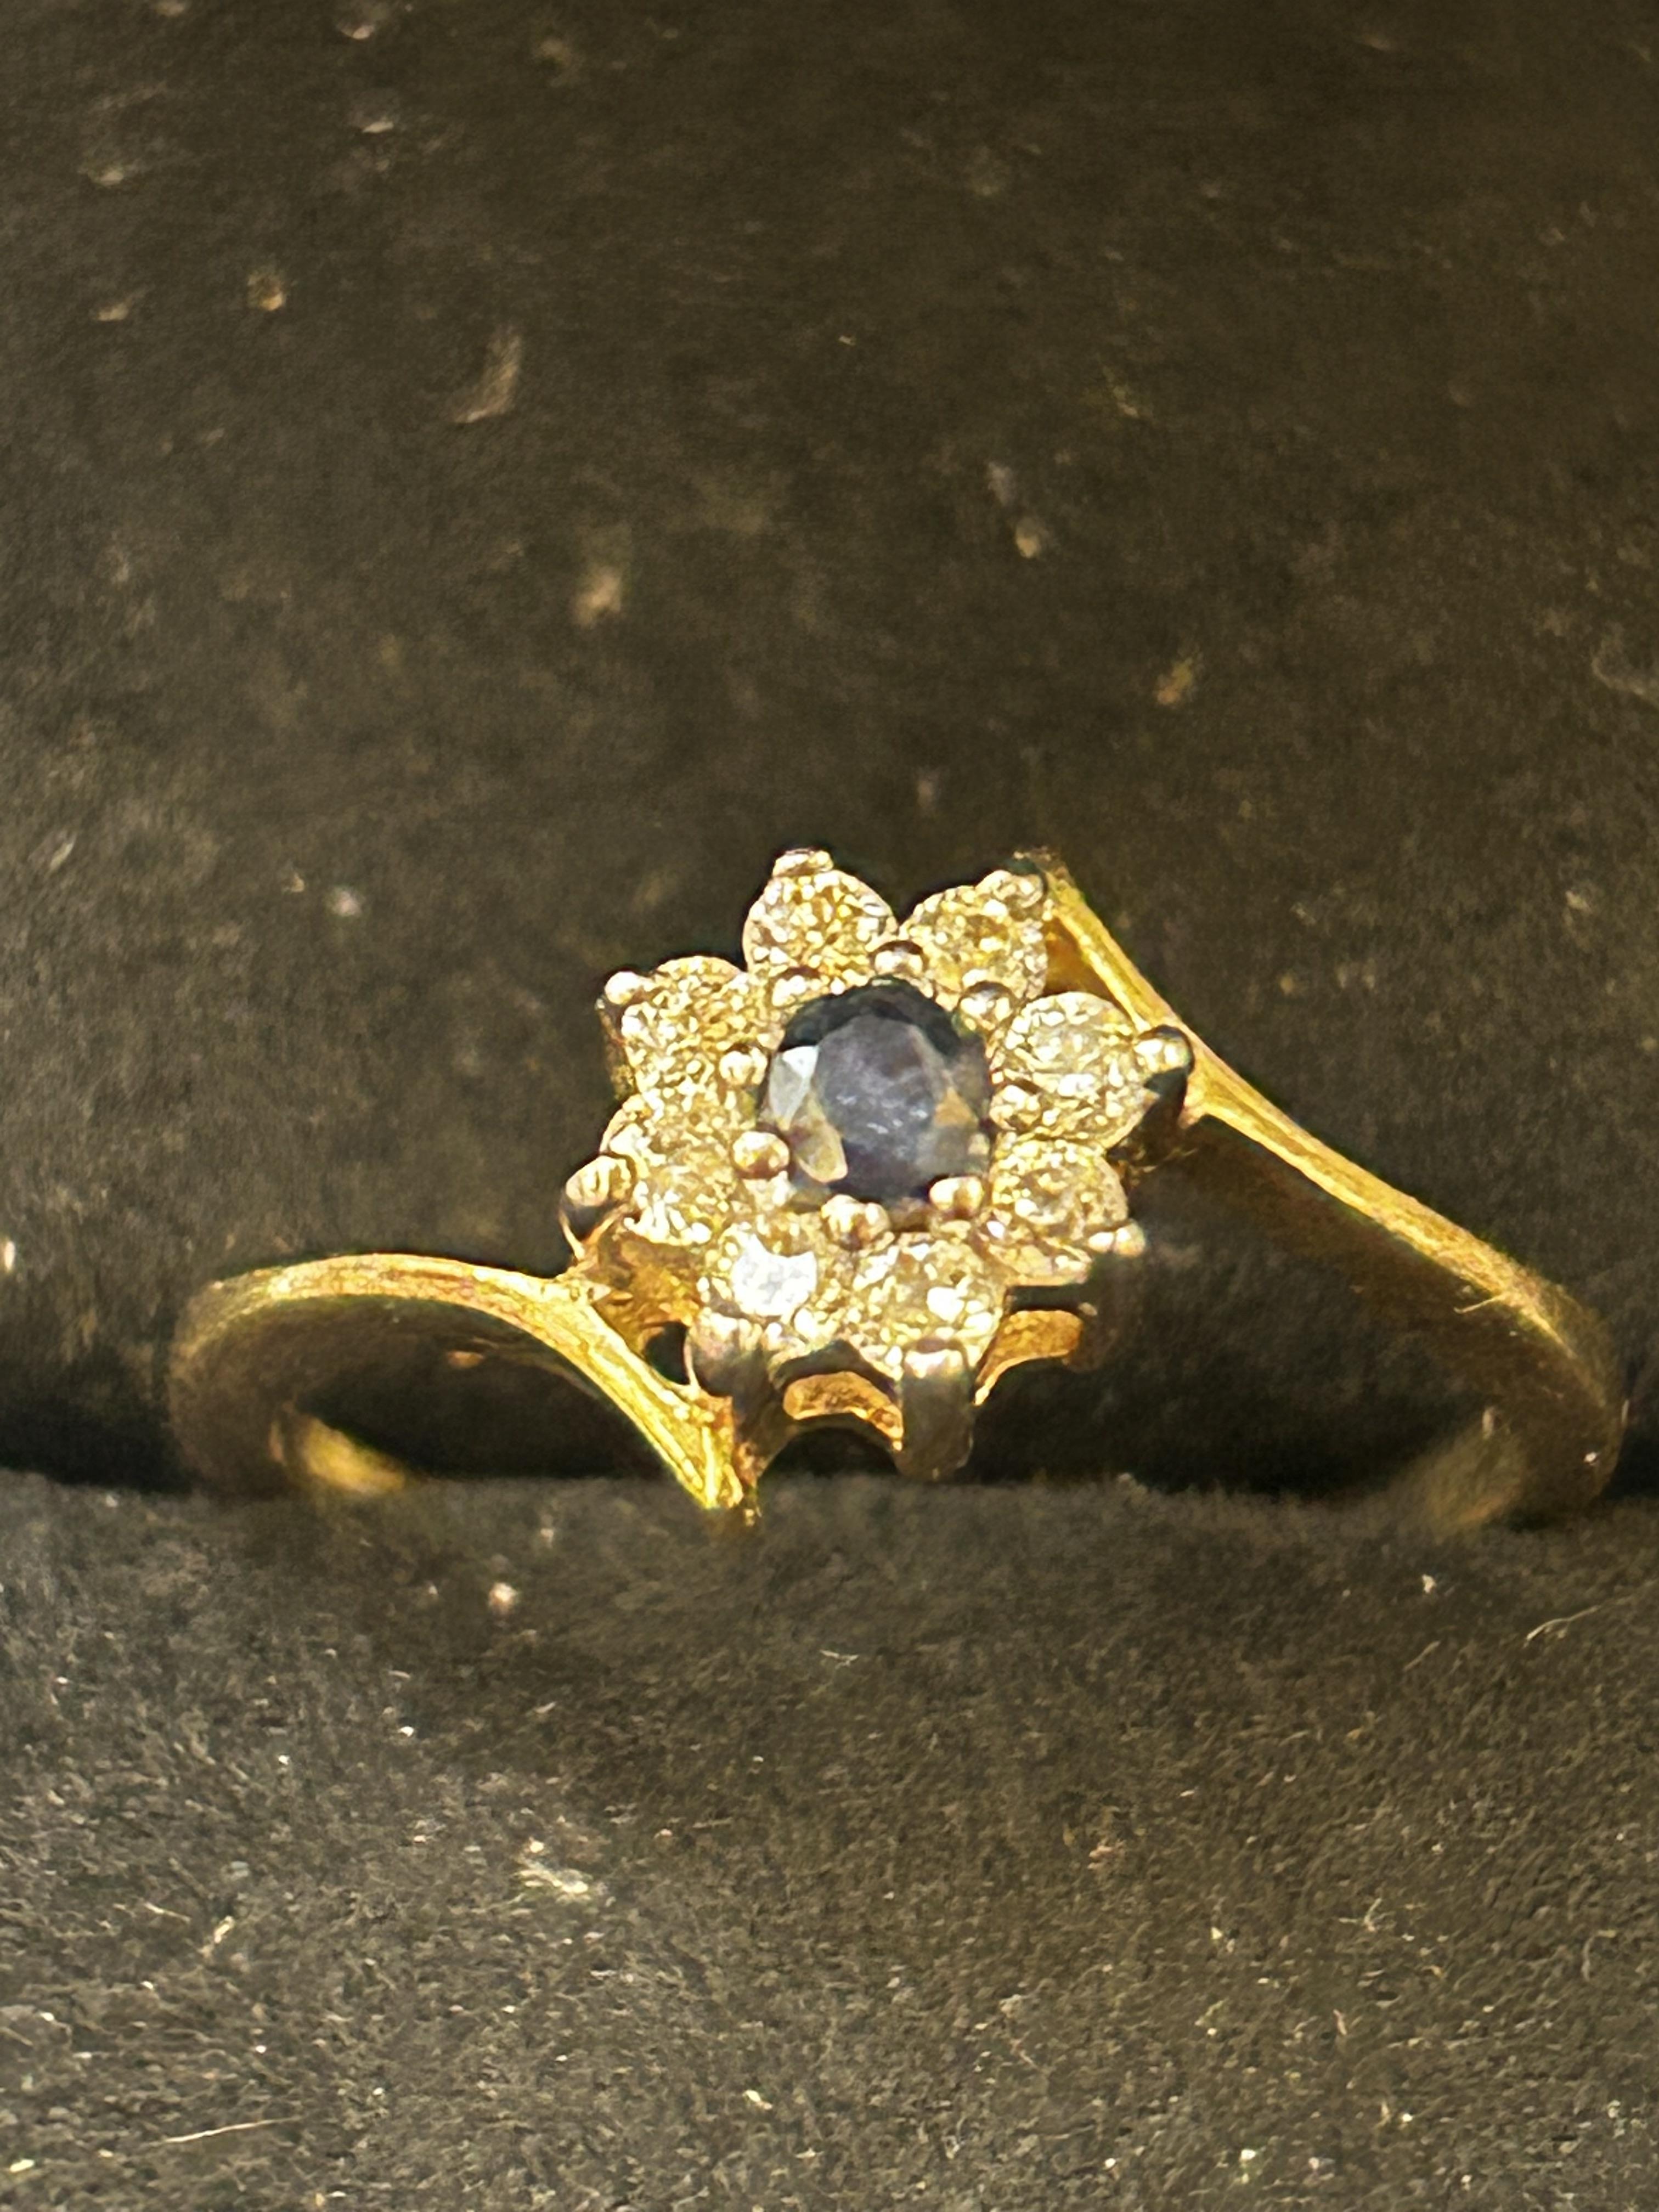 9ct Gold ring set with sapphire & cz stones Size M